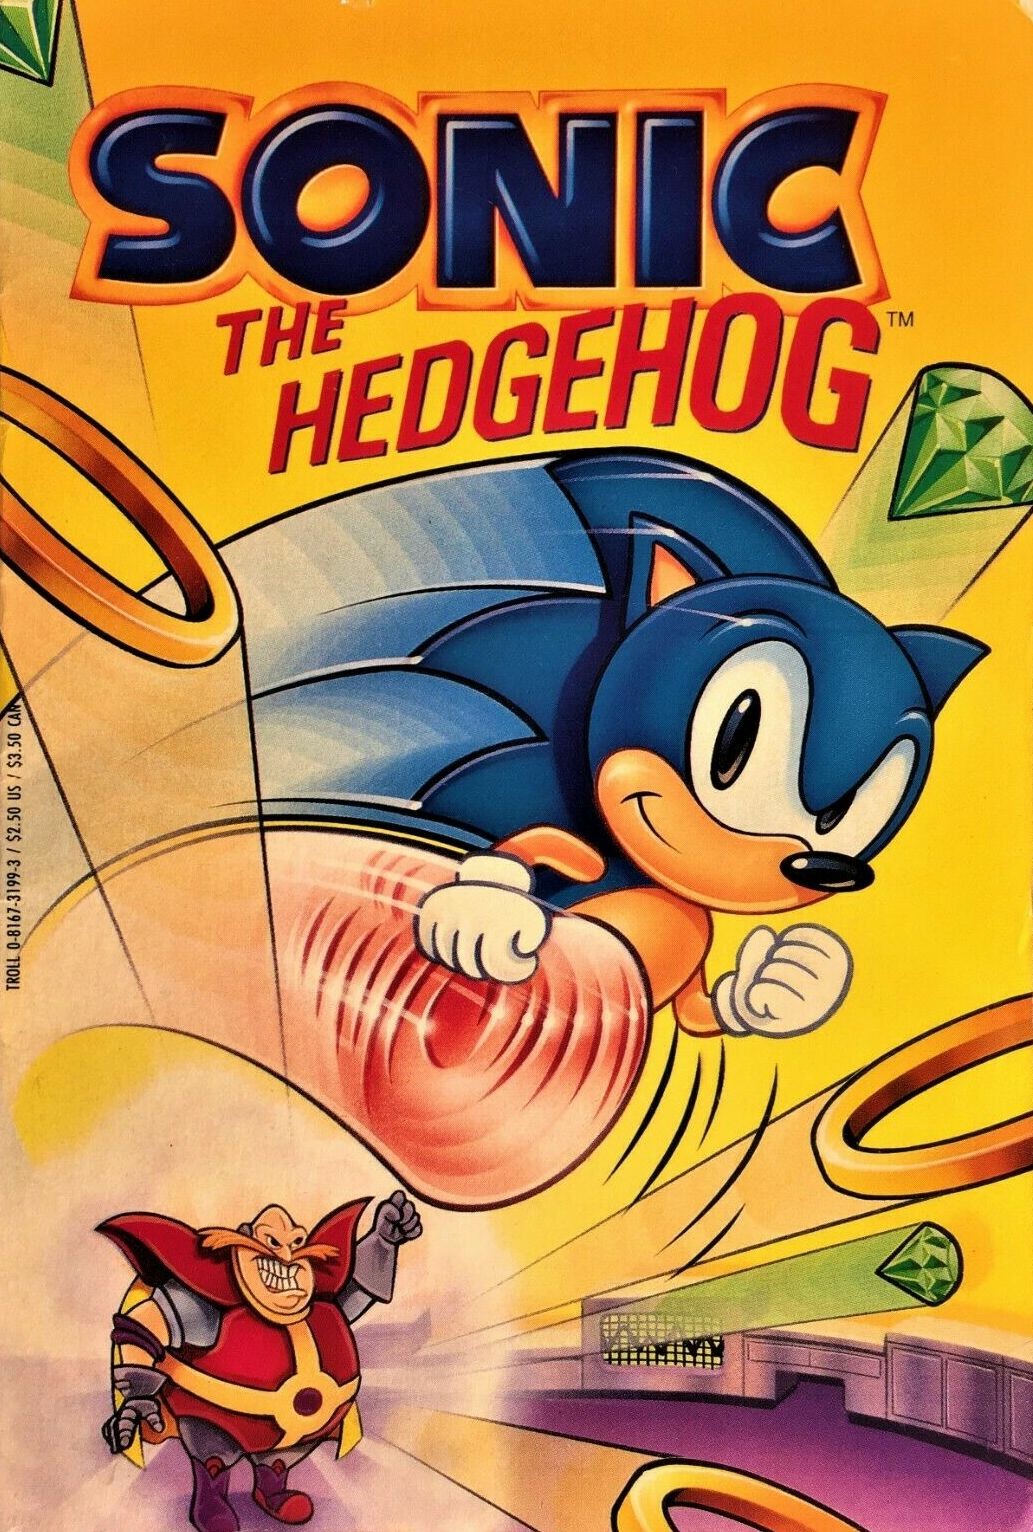 More information about "Sonic the Hedgehog (1993 Book)"